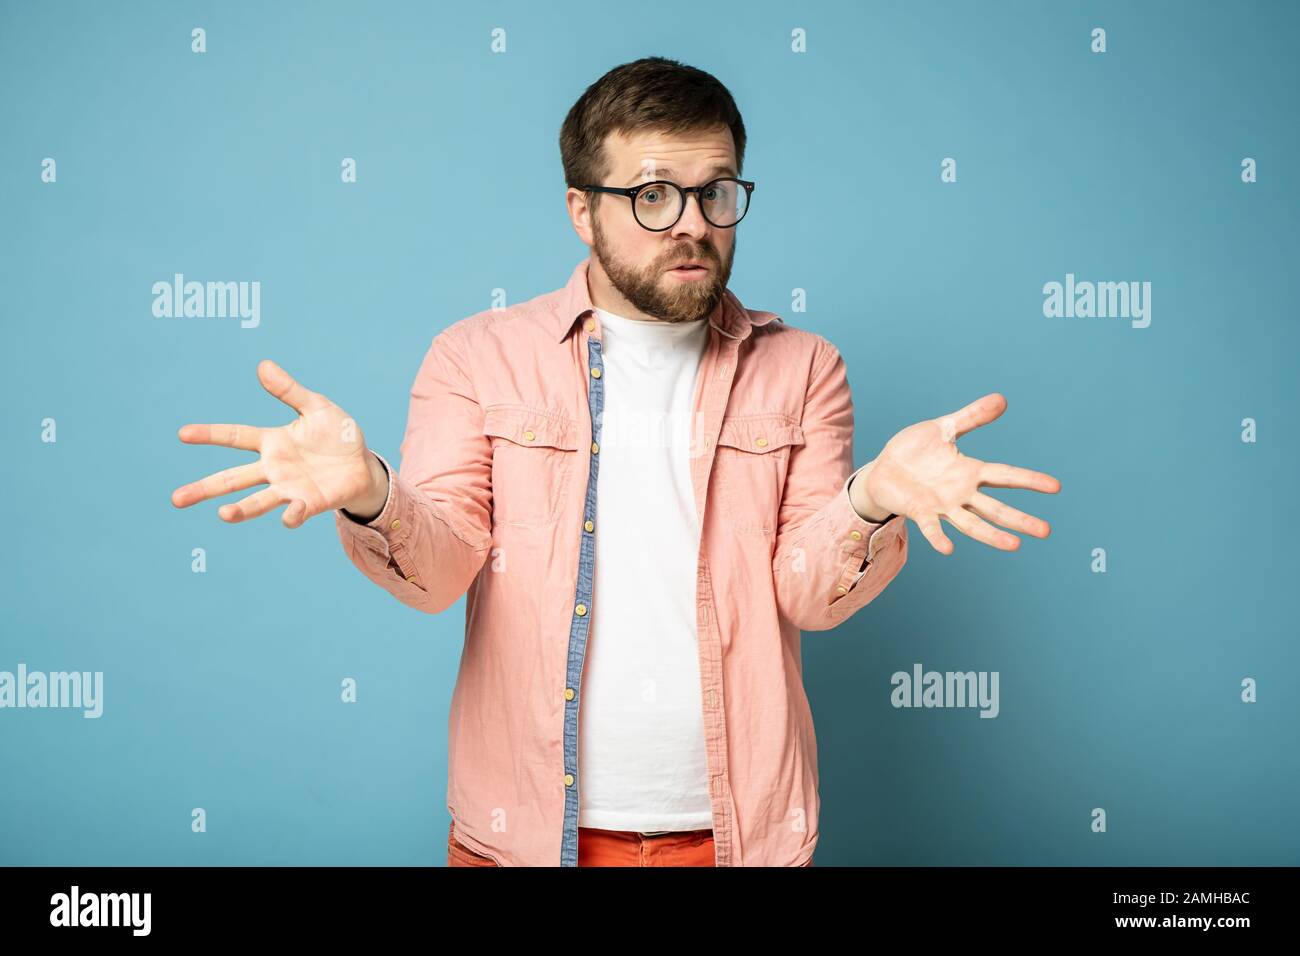 Man is excited and bewildered, he is amazed at what is happening, looks inquiringly at the camera and makes a gesture with hands. Stock Photo